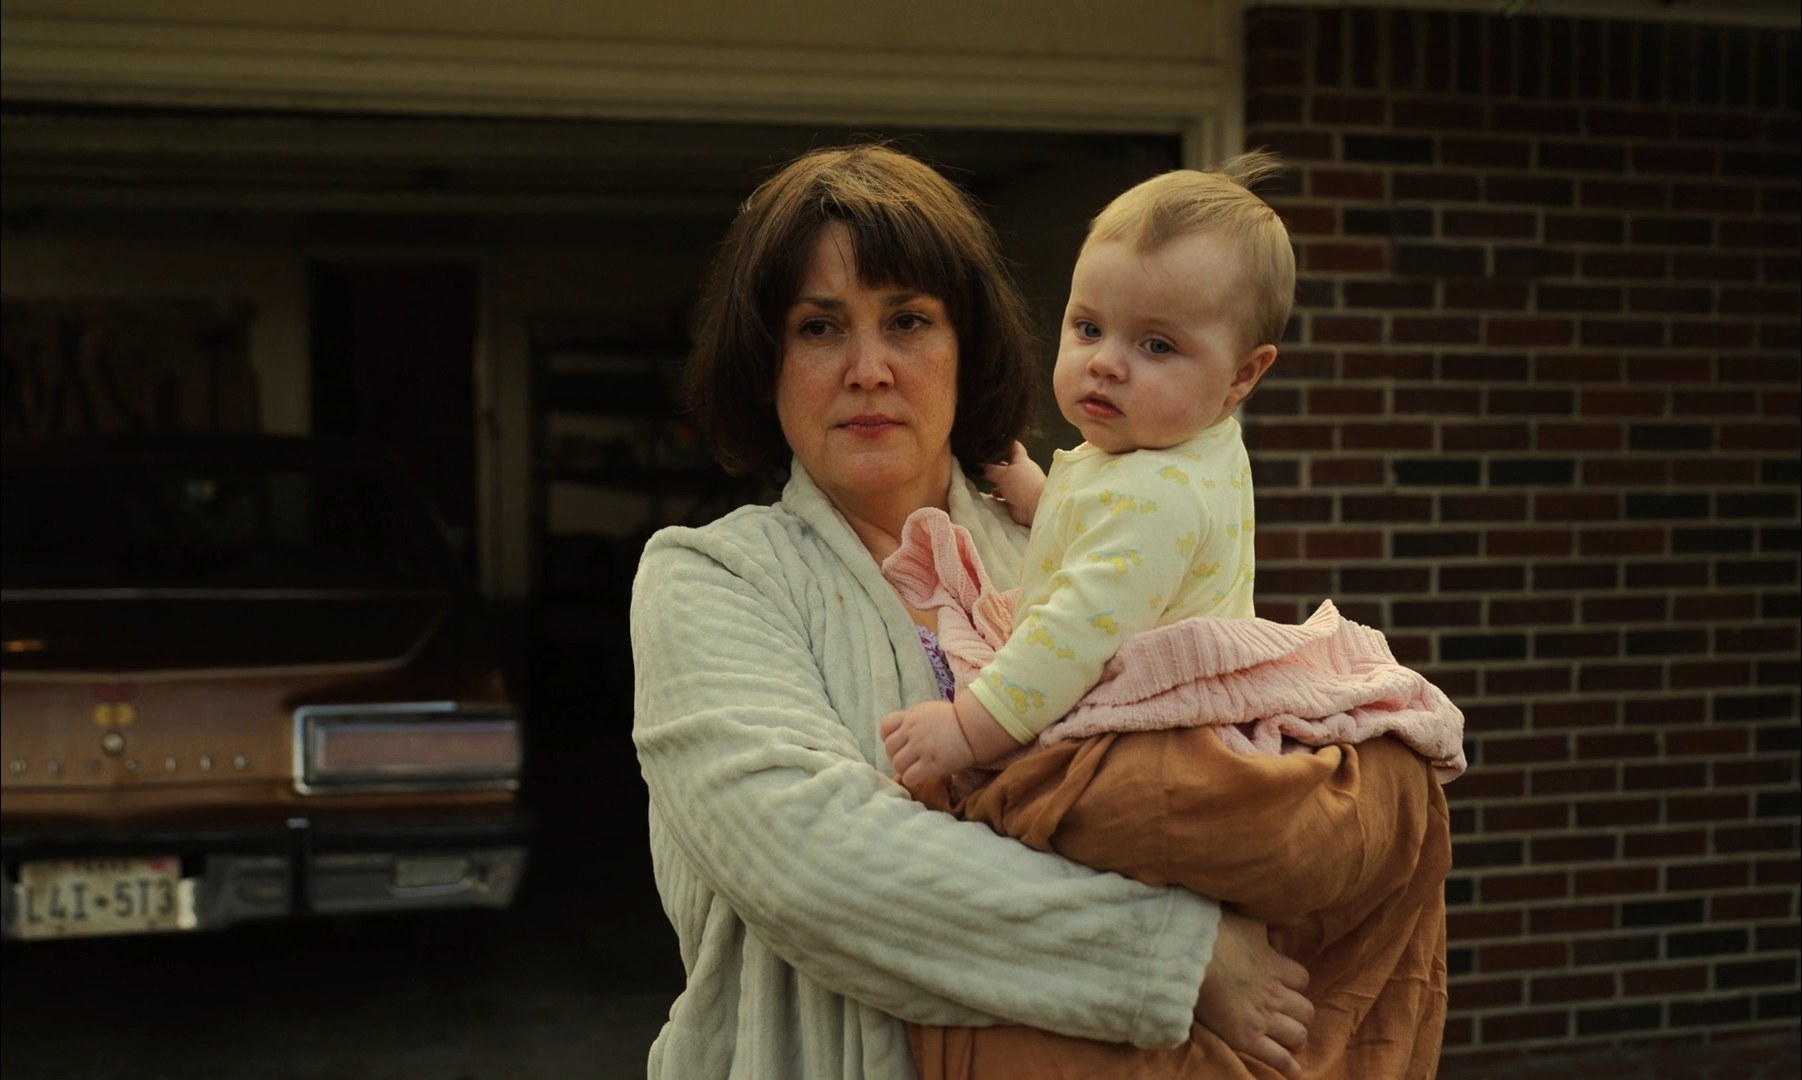 Melanie Lynskey with a baby in her arms